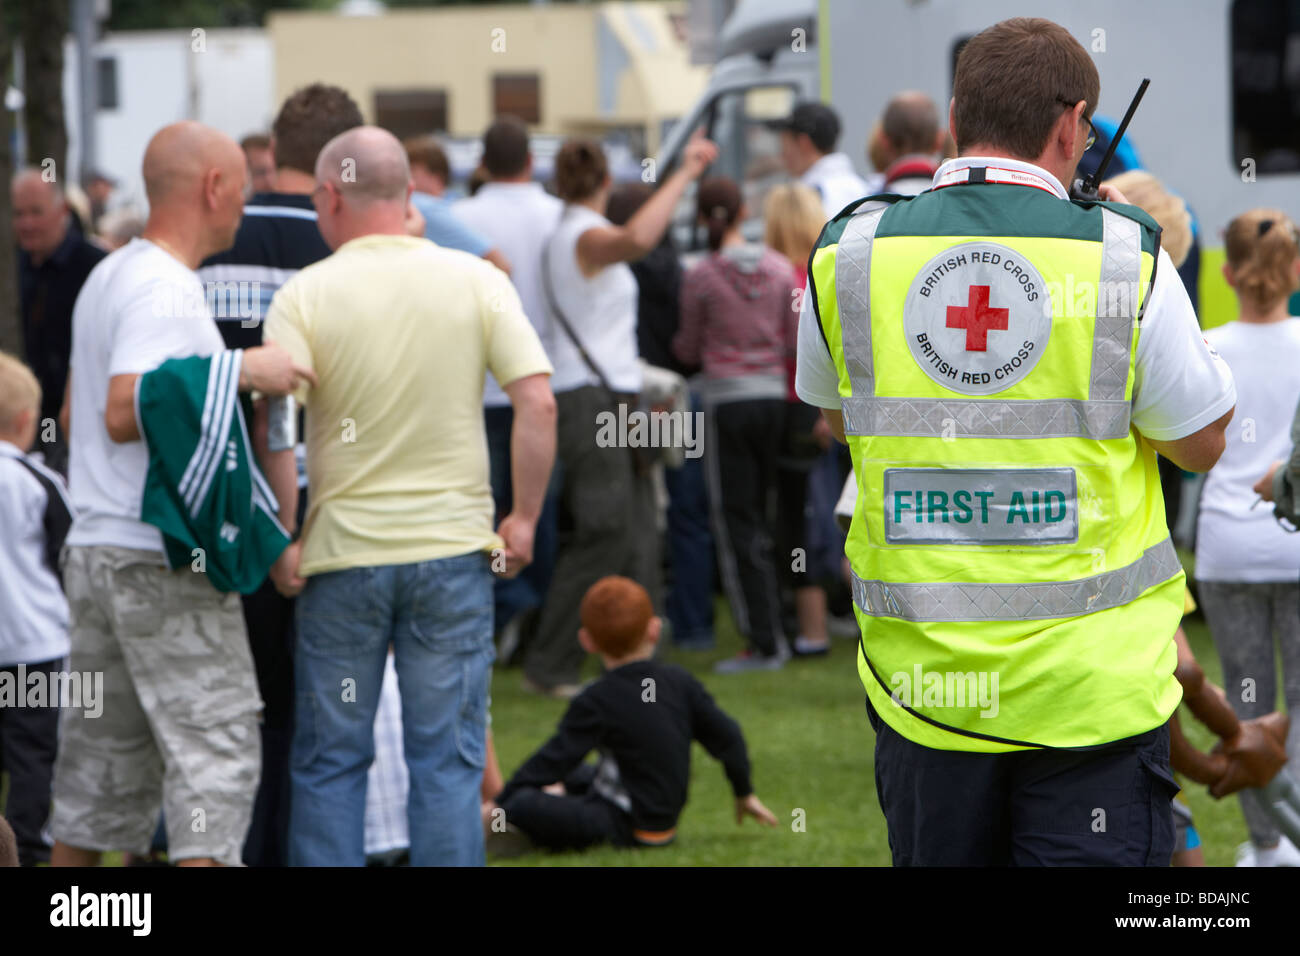 member of the british red cross first aid team on the radio walking through a crowd at an outdoor event in belfast Stock Photo